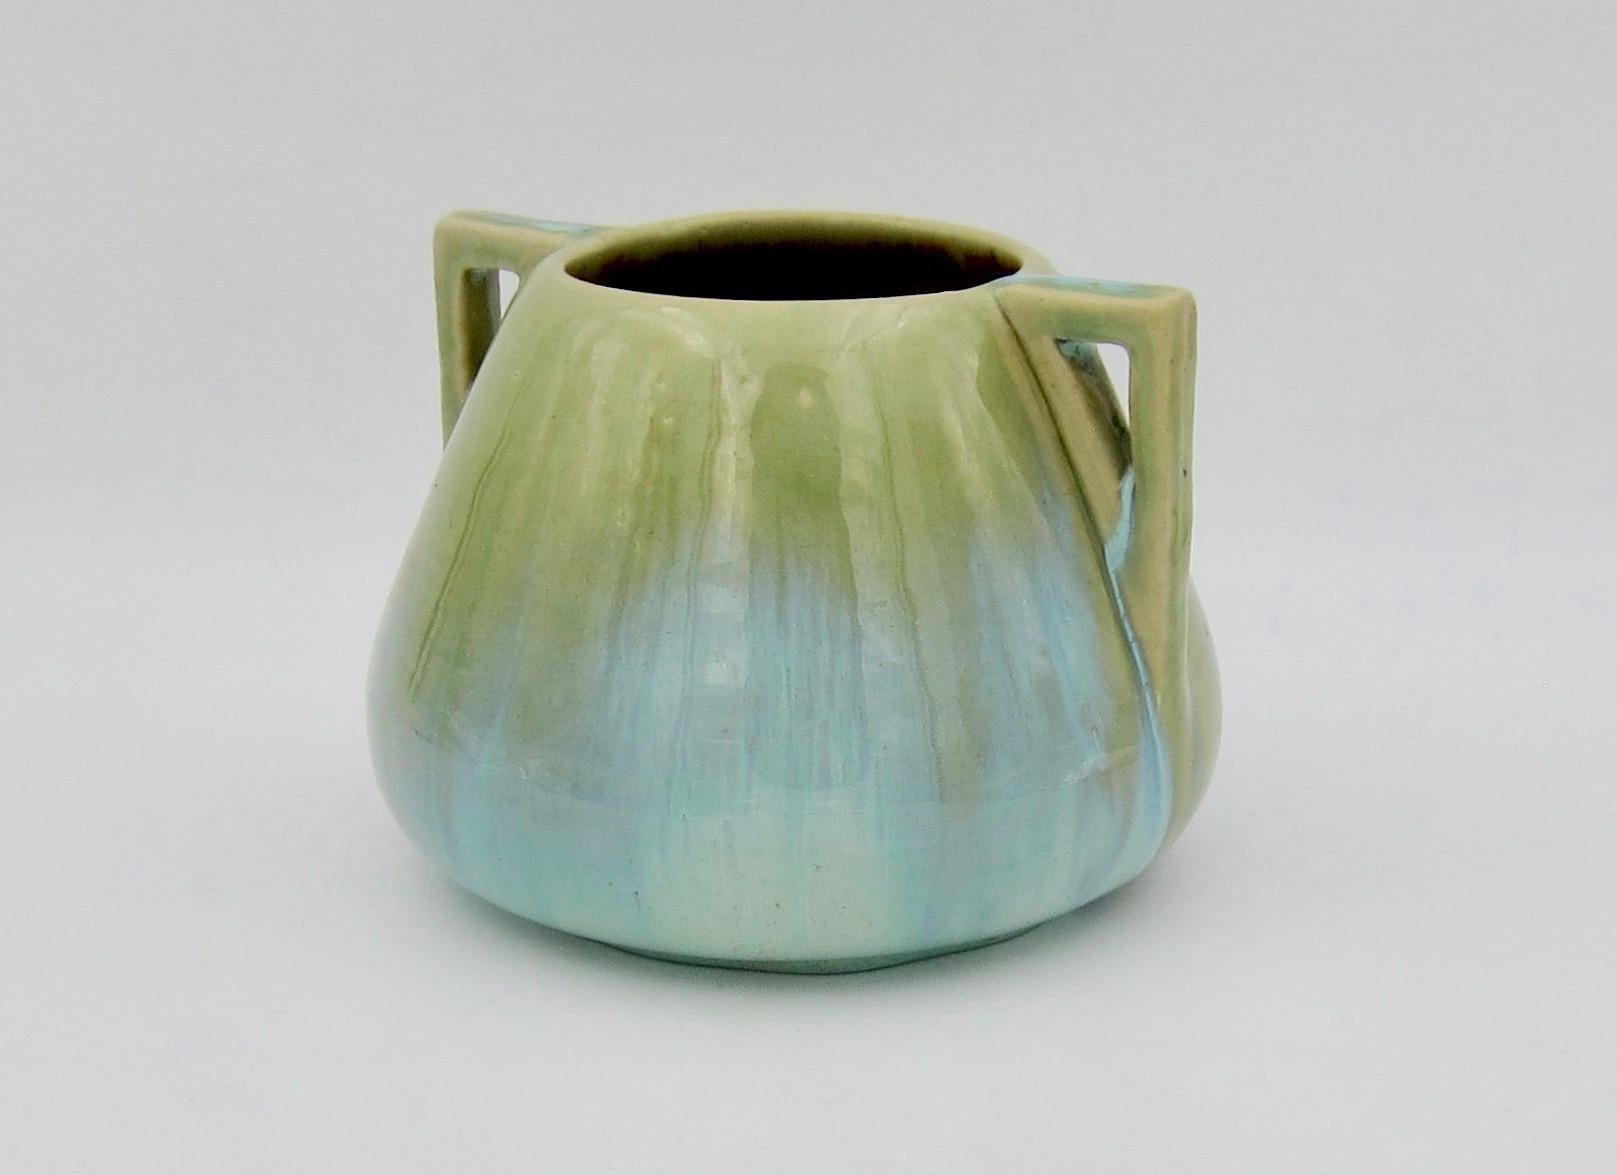 An early 20th century vase from the Arts & Crafts period by Fulper Pottery of Flemington, New Jersey. This art pottery vessel is decorated with a flambé glaze in shades of frothy green and greenish-golden brown.

The vessel is marked underfoot